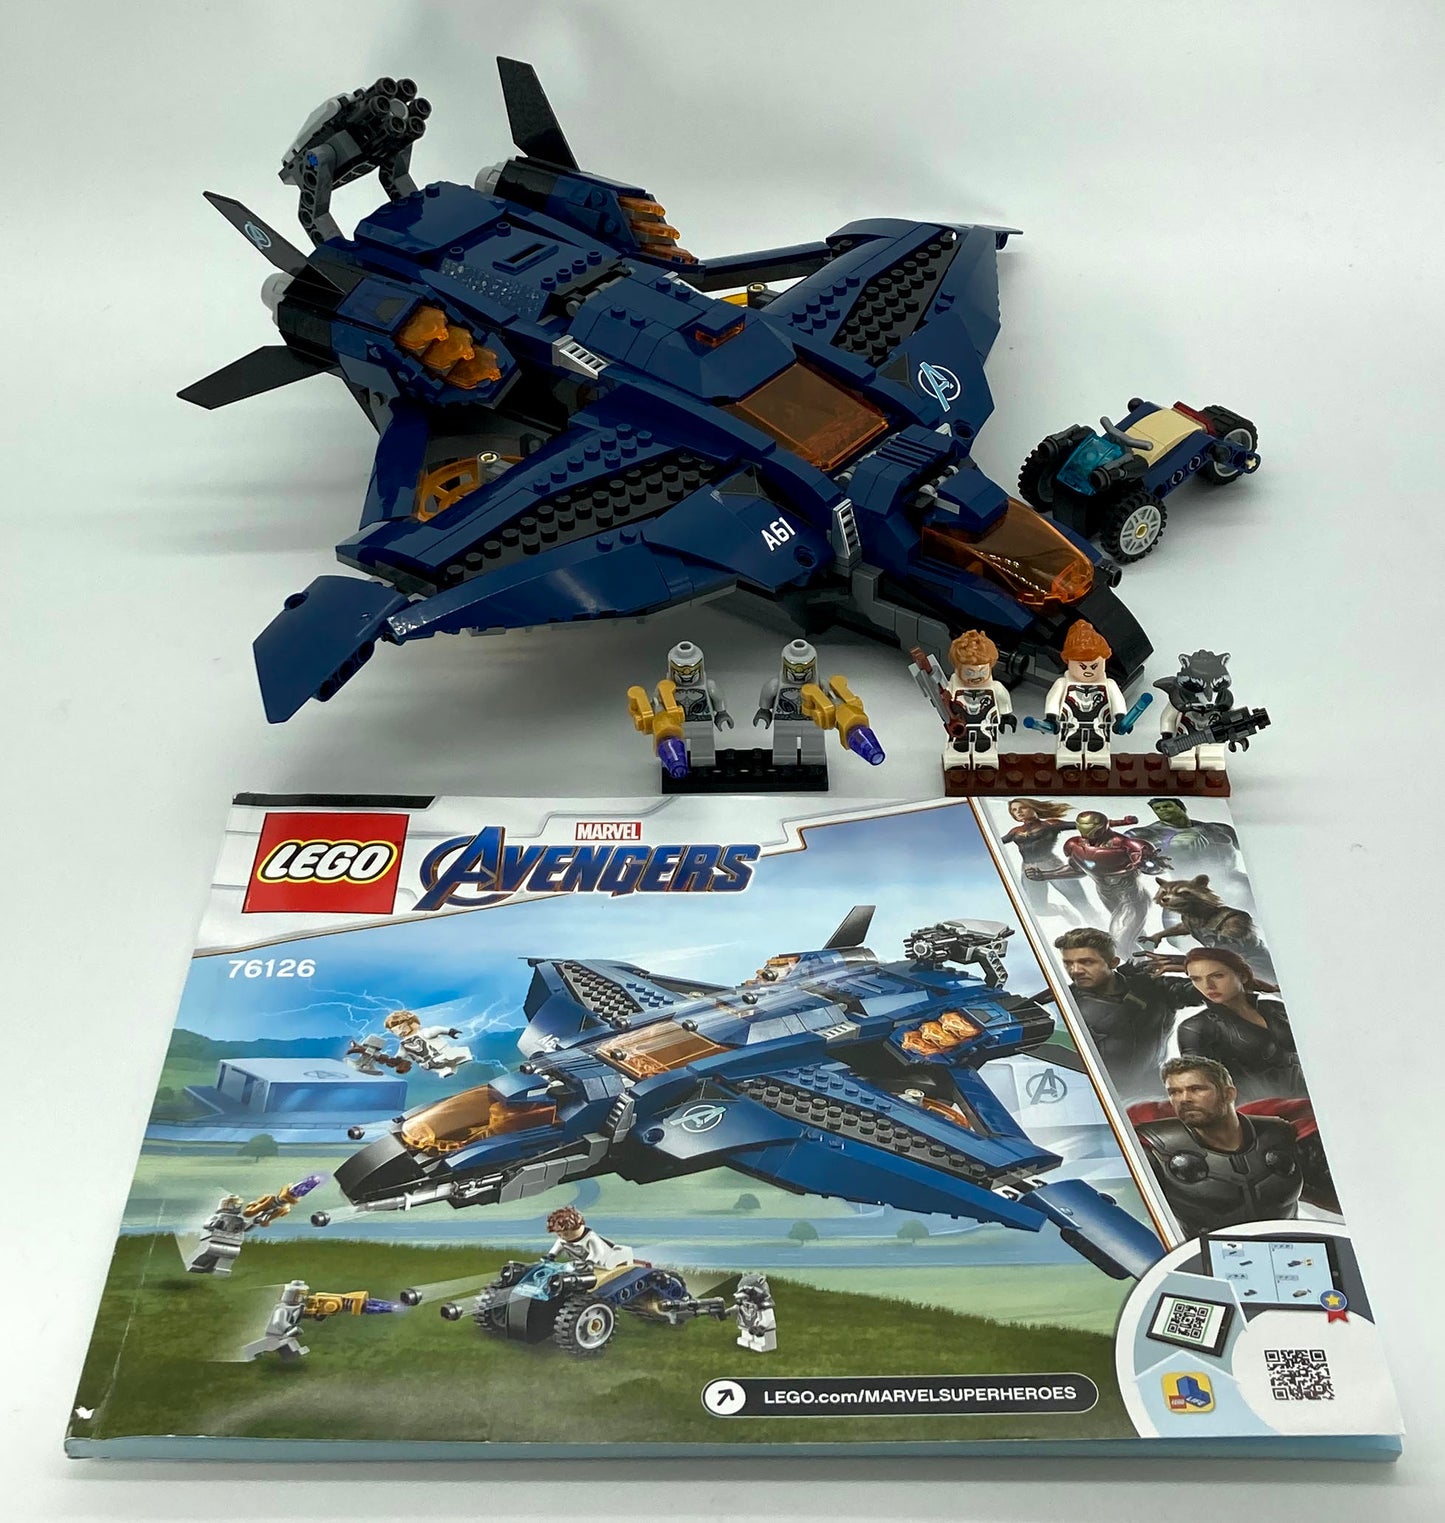 Used Set 76126 Avengers Ultimate Quinjet (with Instruction Manual, No Box)